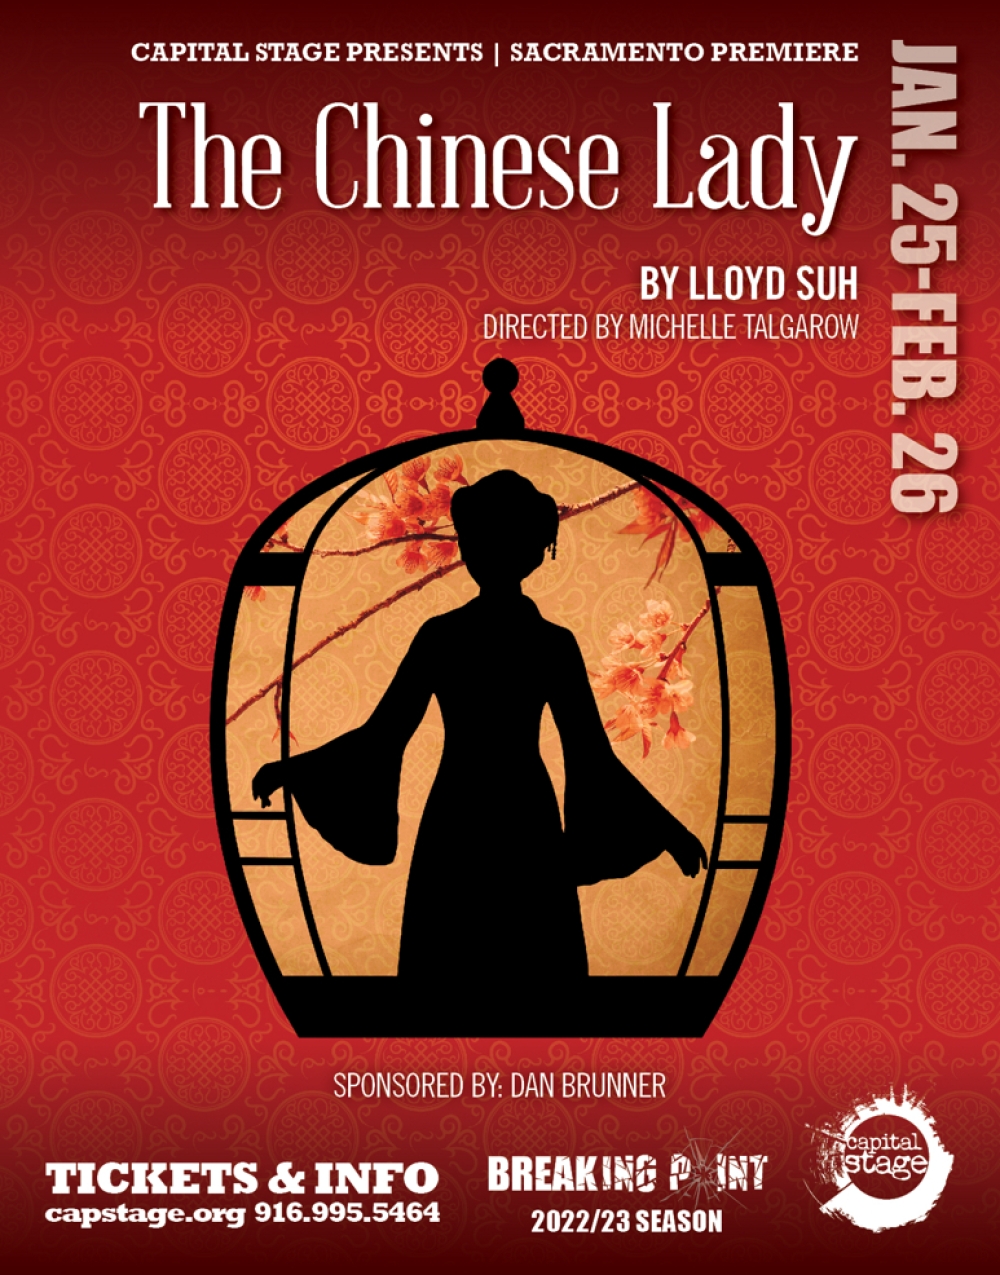 The Chinese Lady at Capital Stage